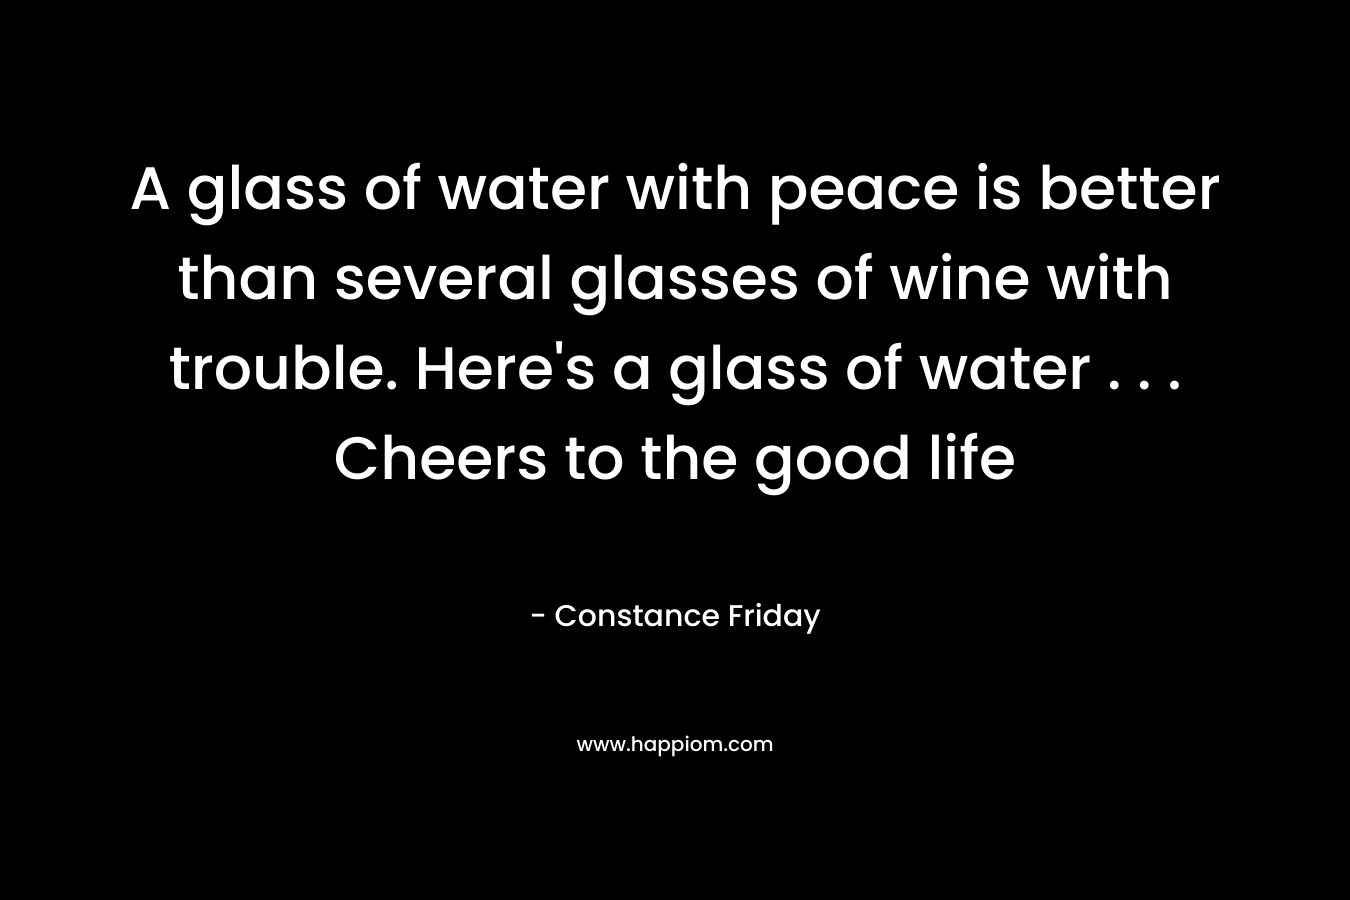 A glass of water with peace is better than several glasses of wine with trouble. Here's a glass of water . . . Cheers to the good life